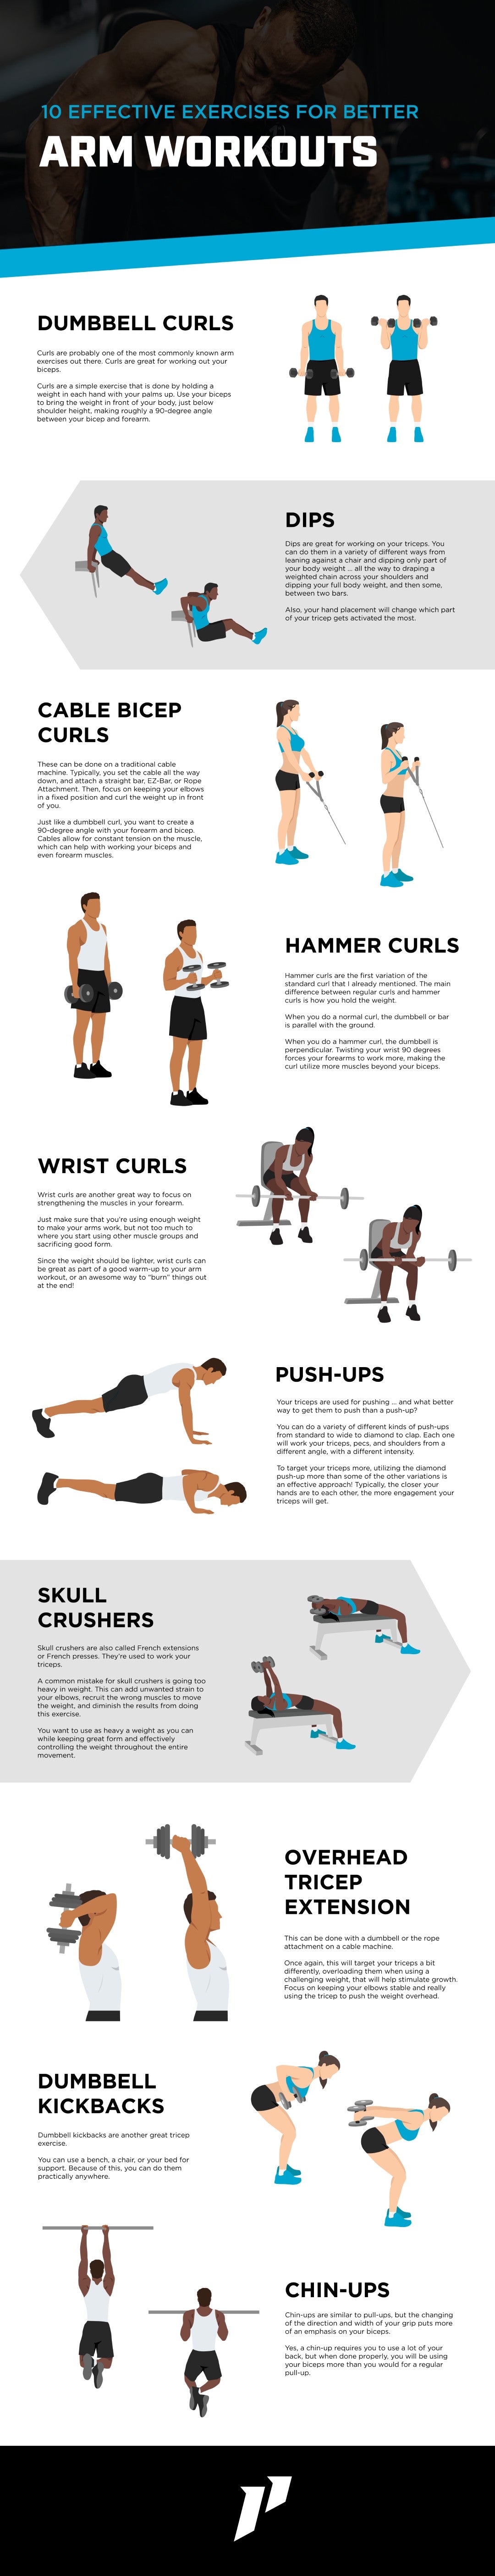 10 Effective Exercises For Better Arm Workouts